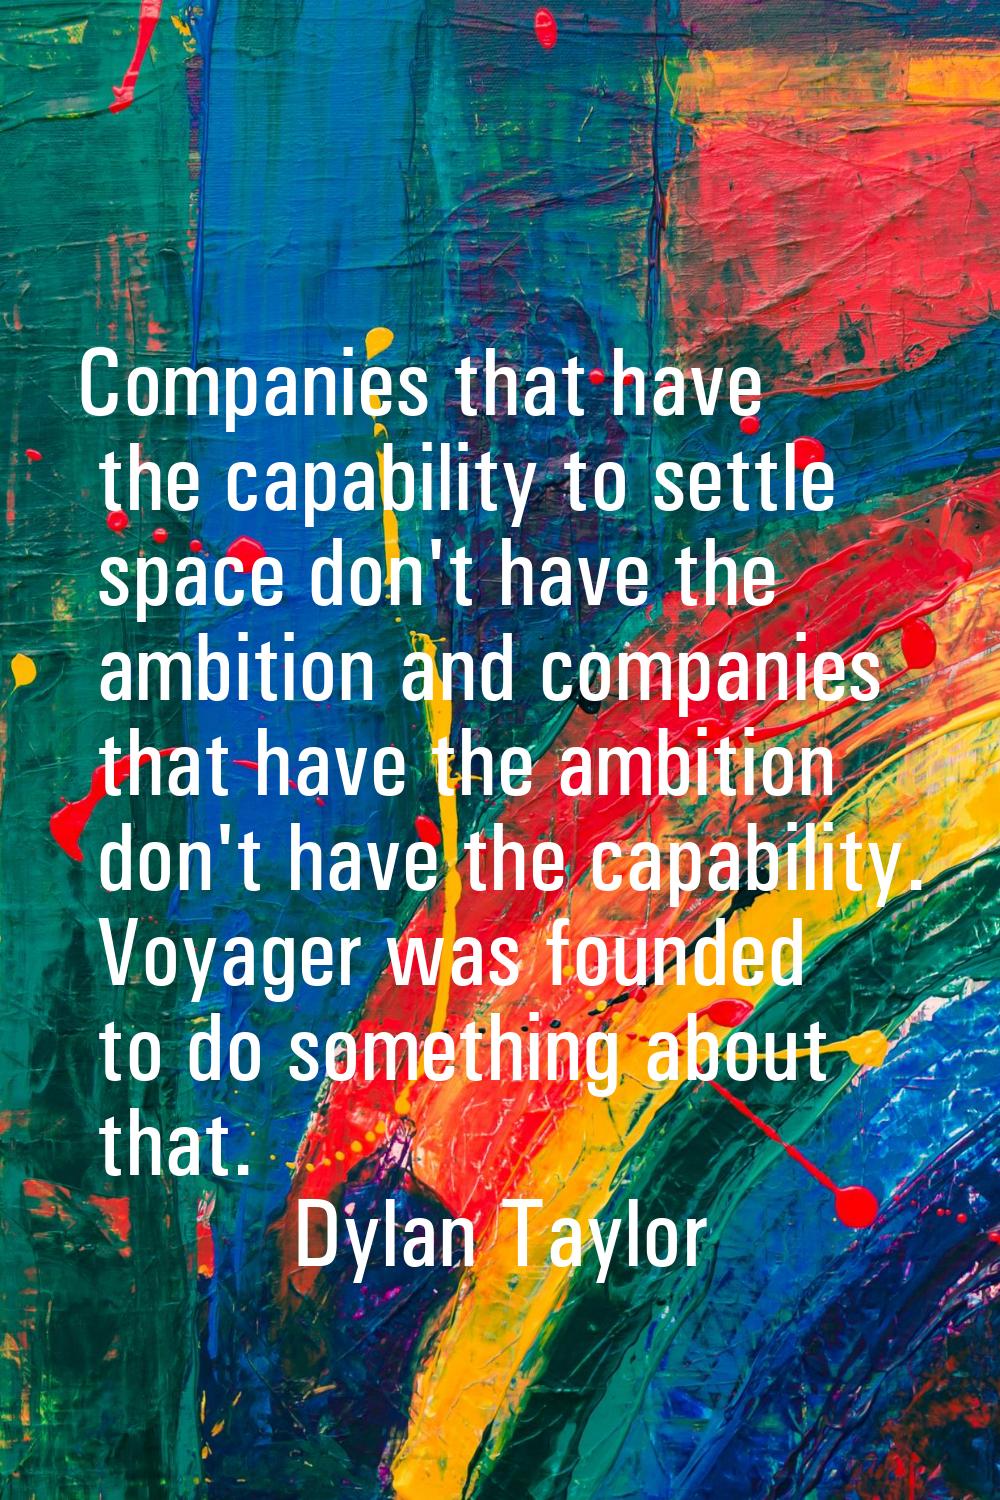 Companies that have the capability to settle space don't have the ambition and companies that have 